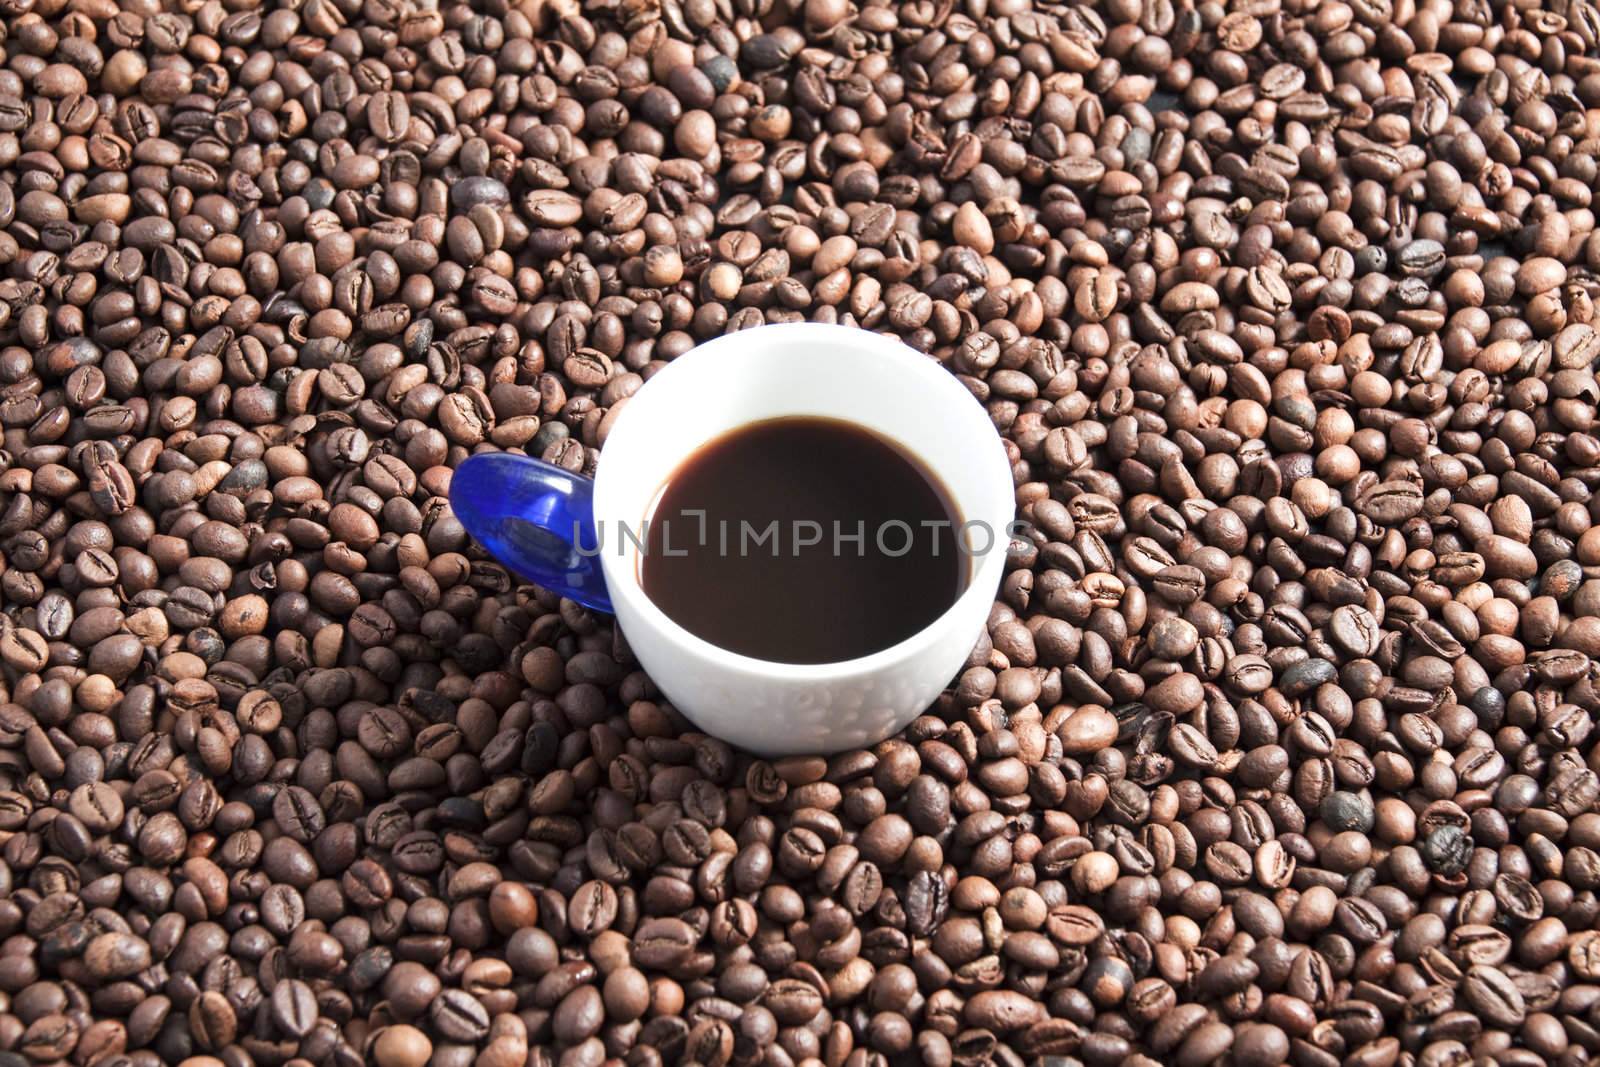 A cup full of coffee surrounded by other coffee beans